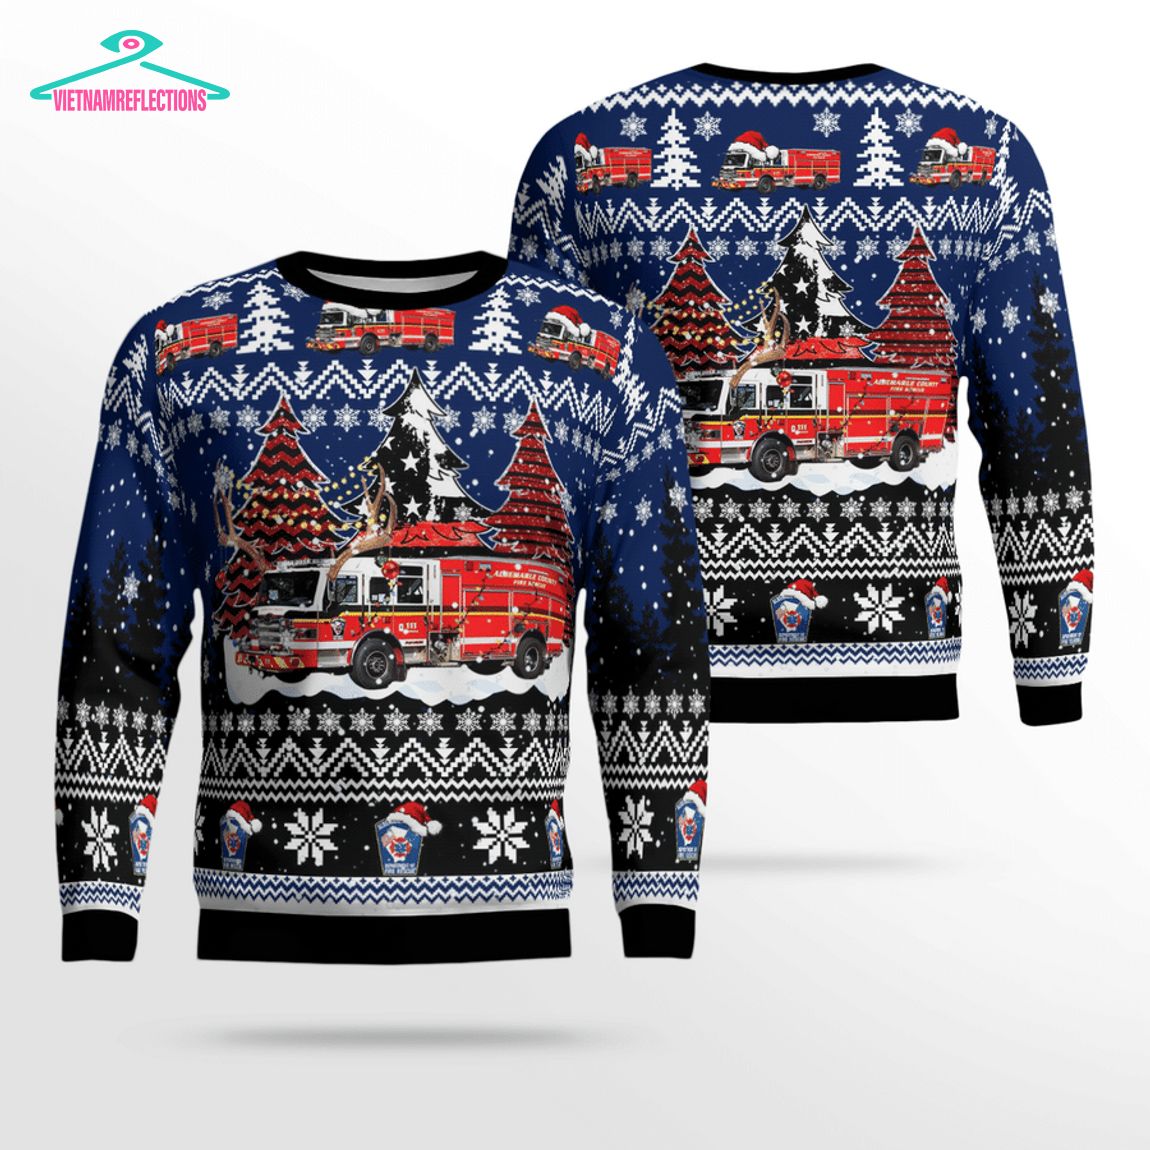 Albemarle County Fire Rescue 3D Christmas Sweater - Looking so nice